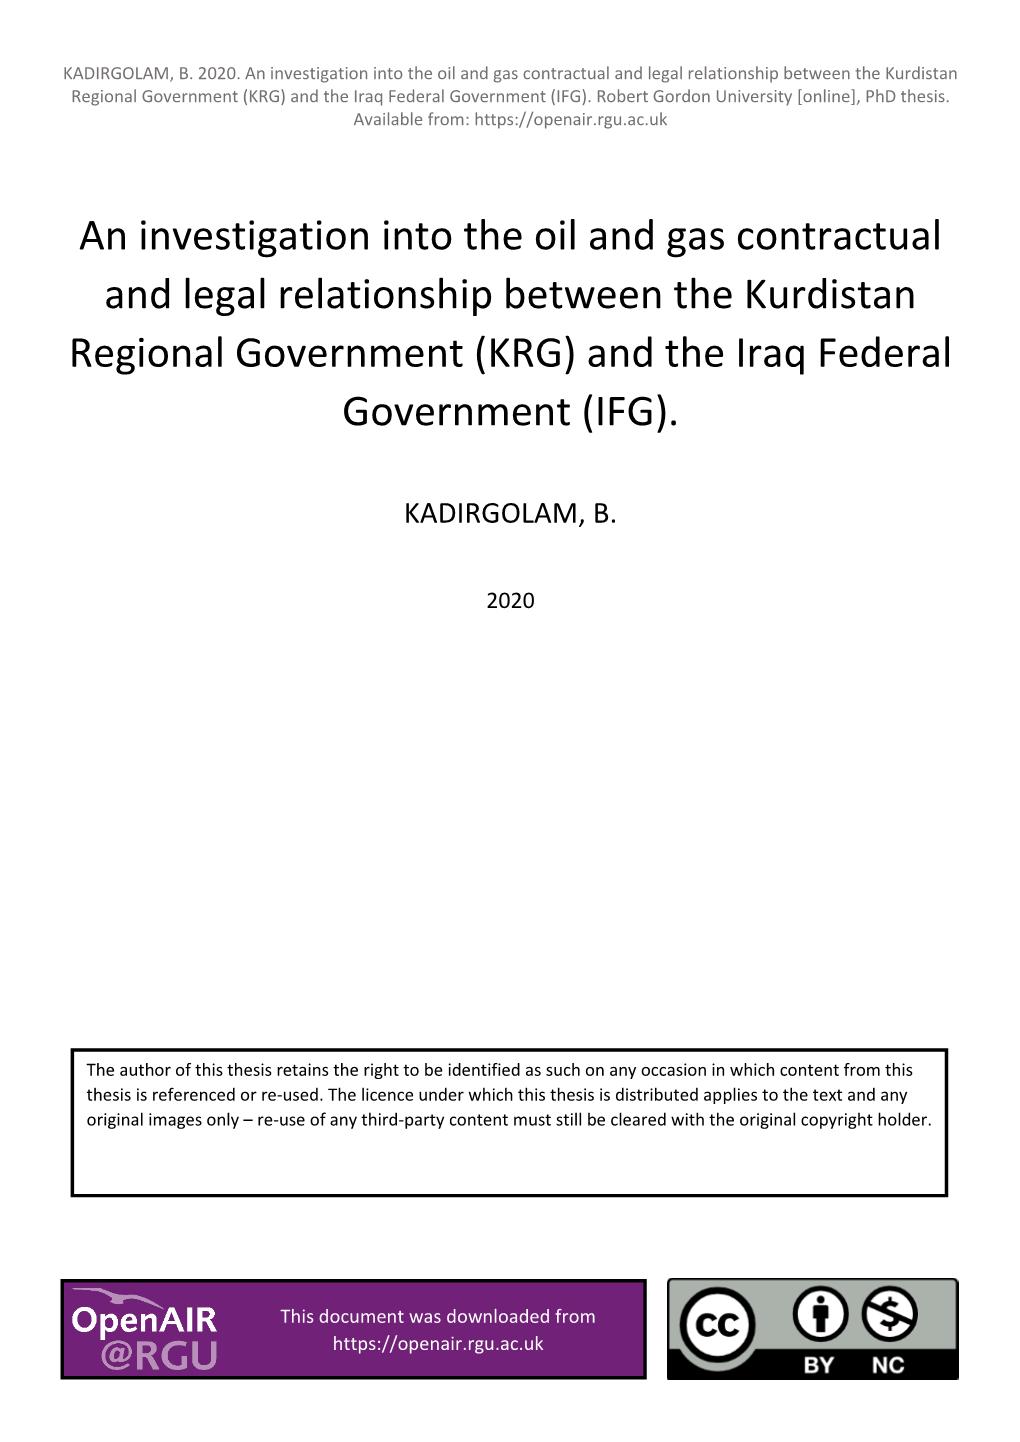 An Investigation Into the Oil and Gas Contractual and Legal Relationship Between the Kurdistan Regional Government (KRG) and the Iraq Federal Government (IFG)